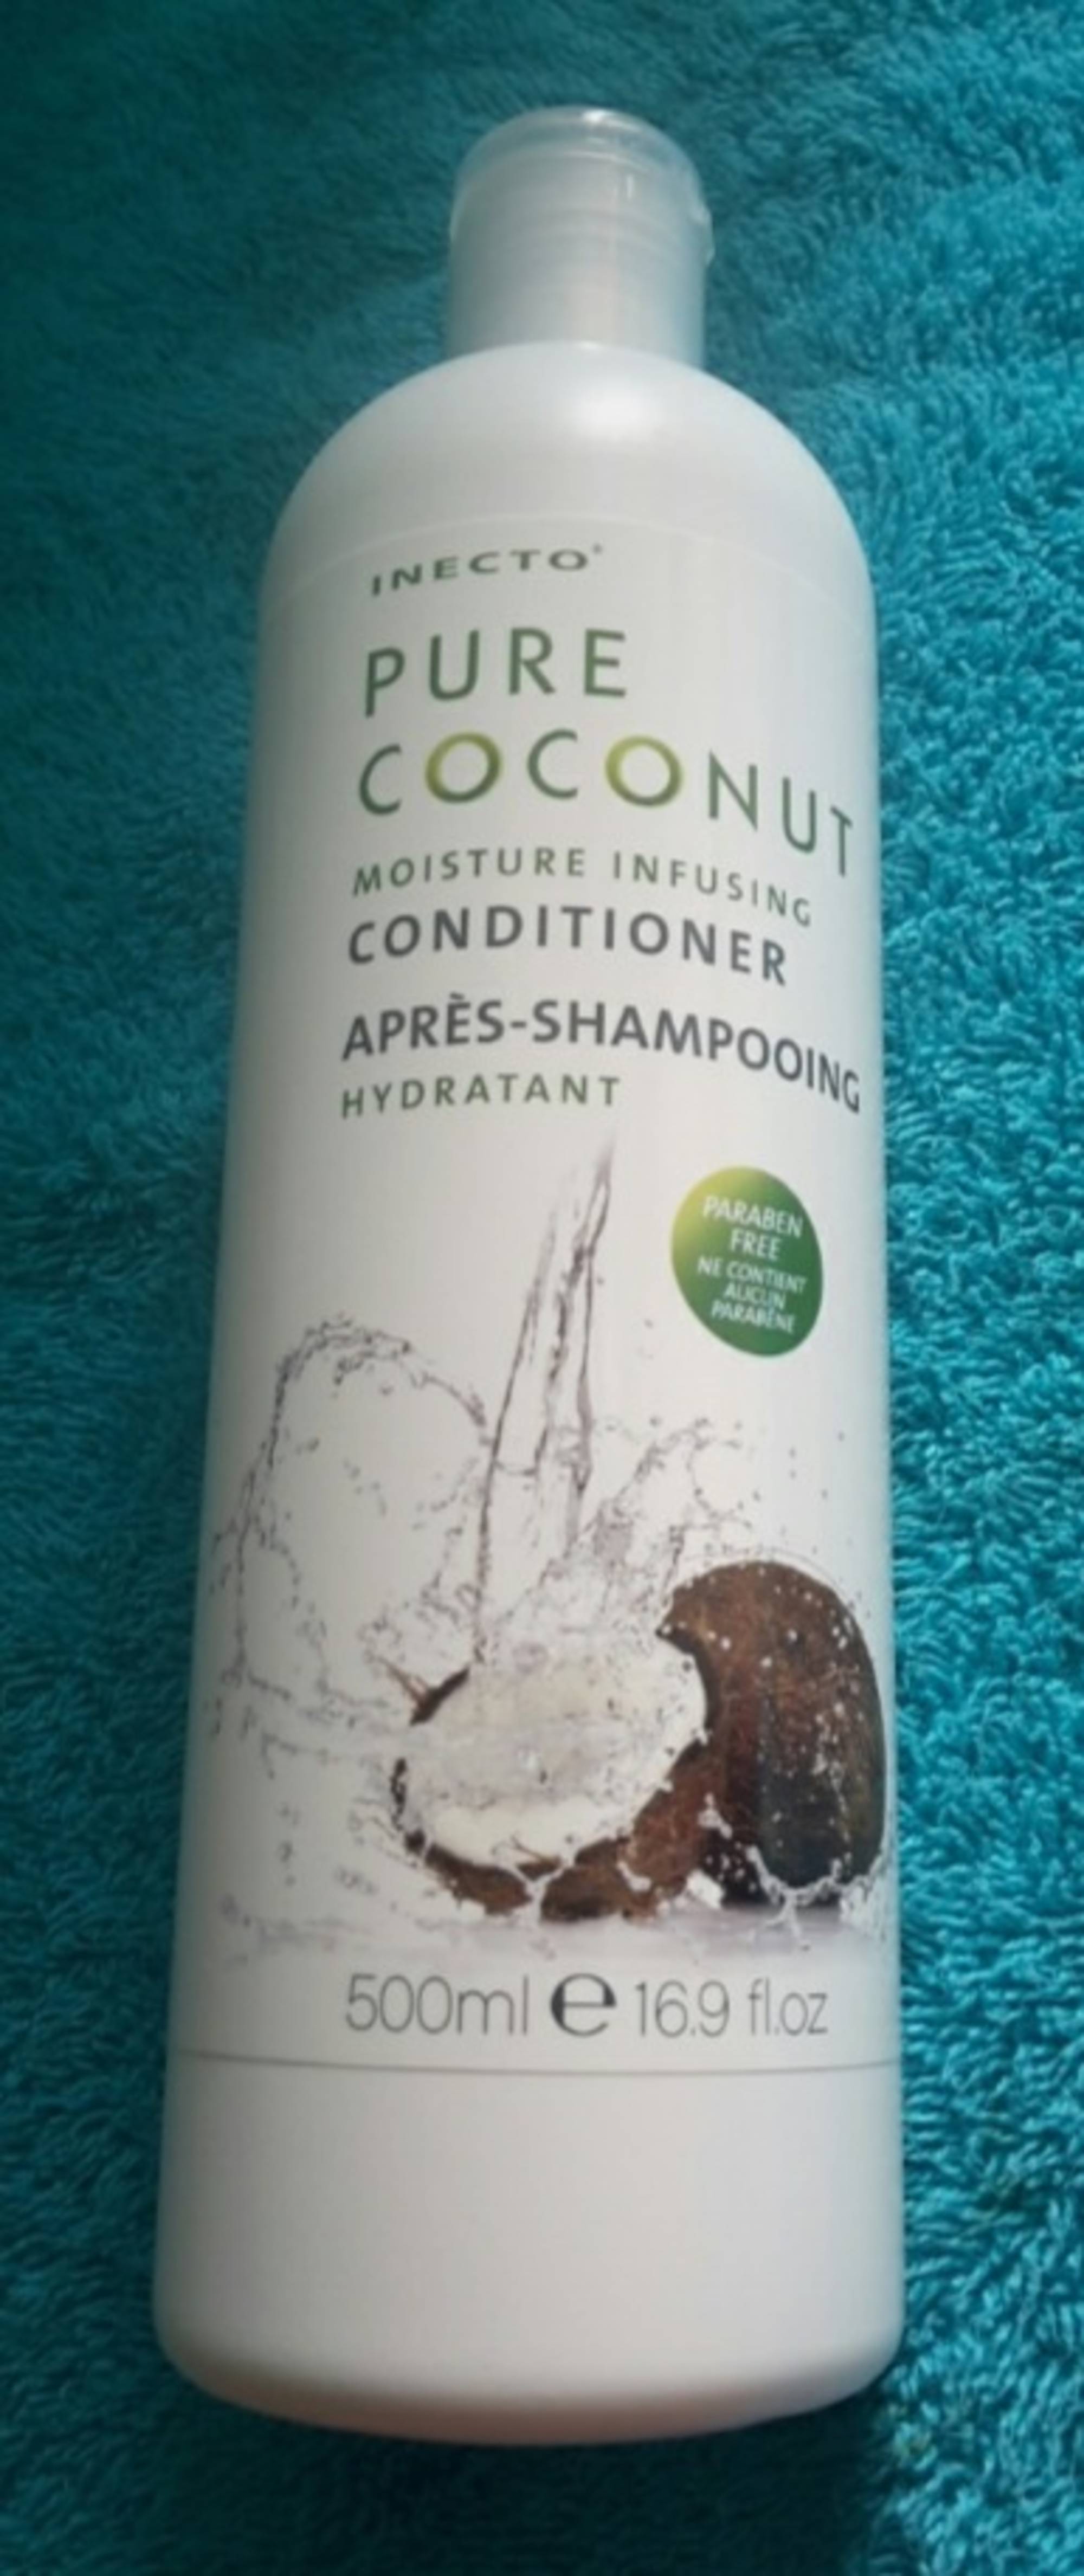 INECTO - Pure coconut - Après-shampooing hydratant